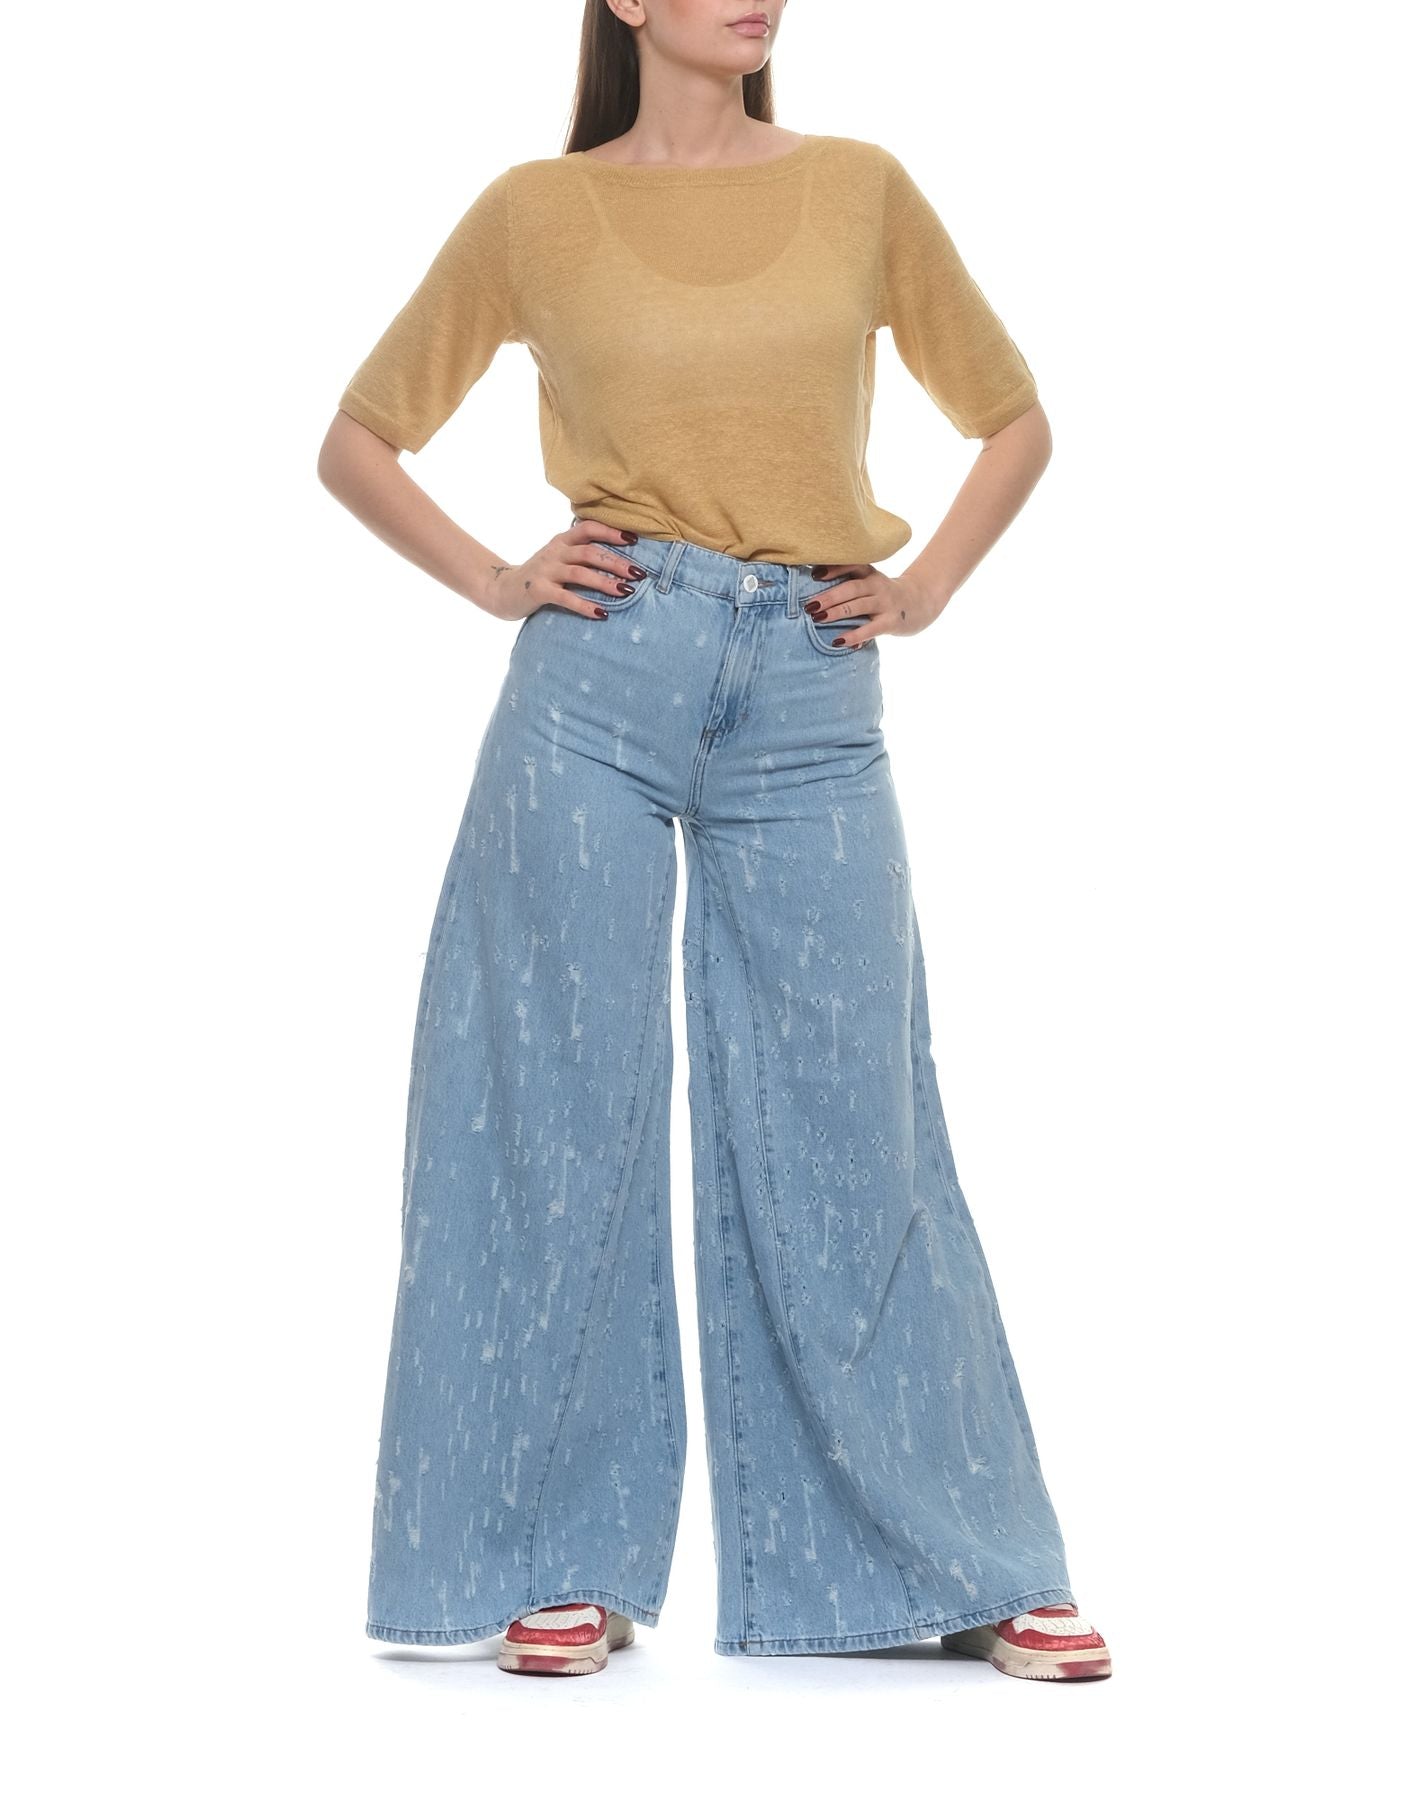 Jeans for woman AMD002D3802021 TURN APART Amish